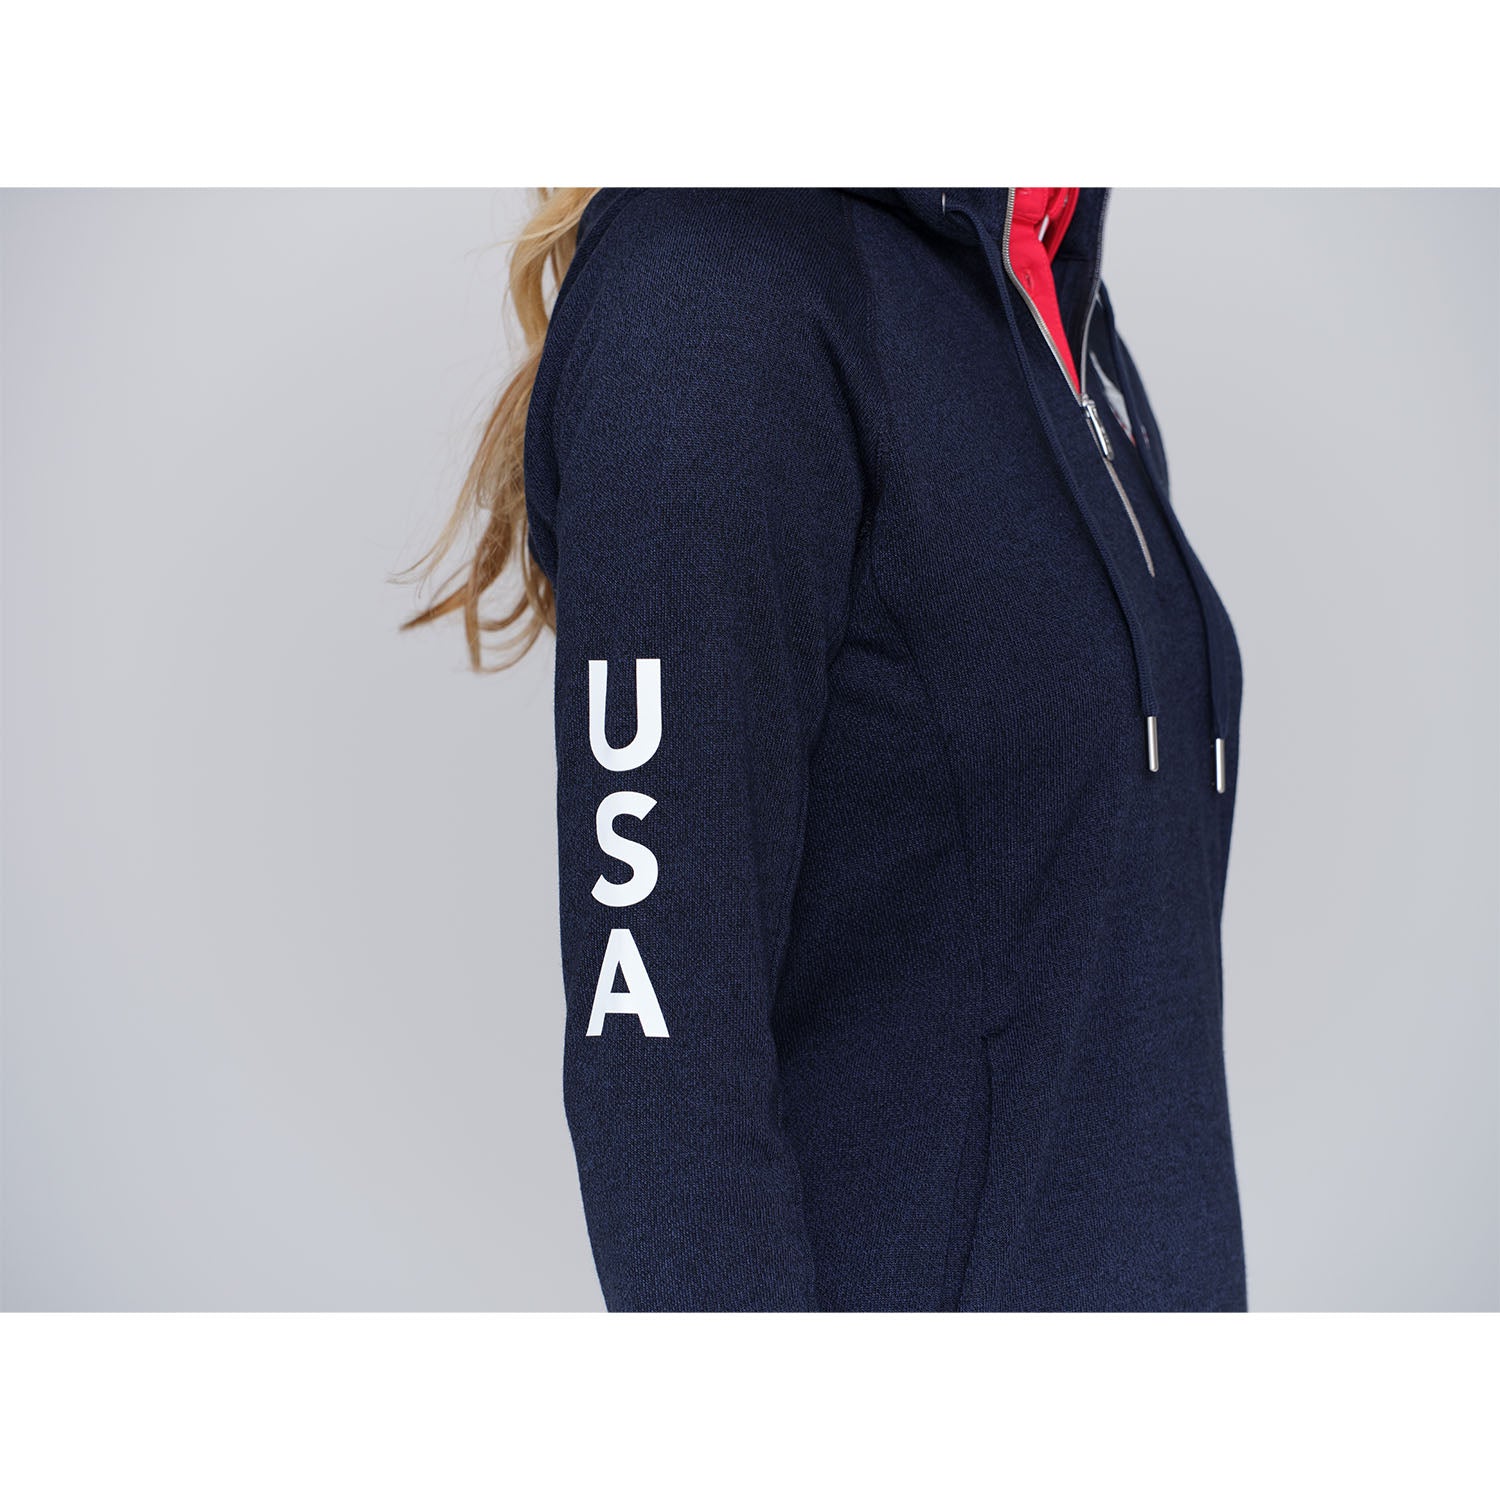 Dunning 2023 LPGA Official Solheim Cup Team Uniform Women's Quarter Zip Hoodie in Halo Heather - Lifestyle Zoomed in Right Side View